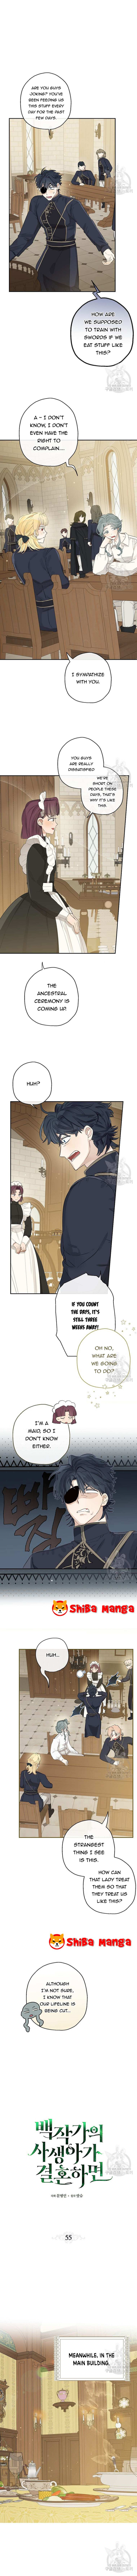 When The Count's Illegitimate Daughter Gets Married - Page 2